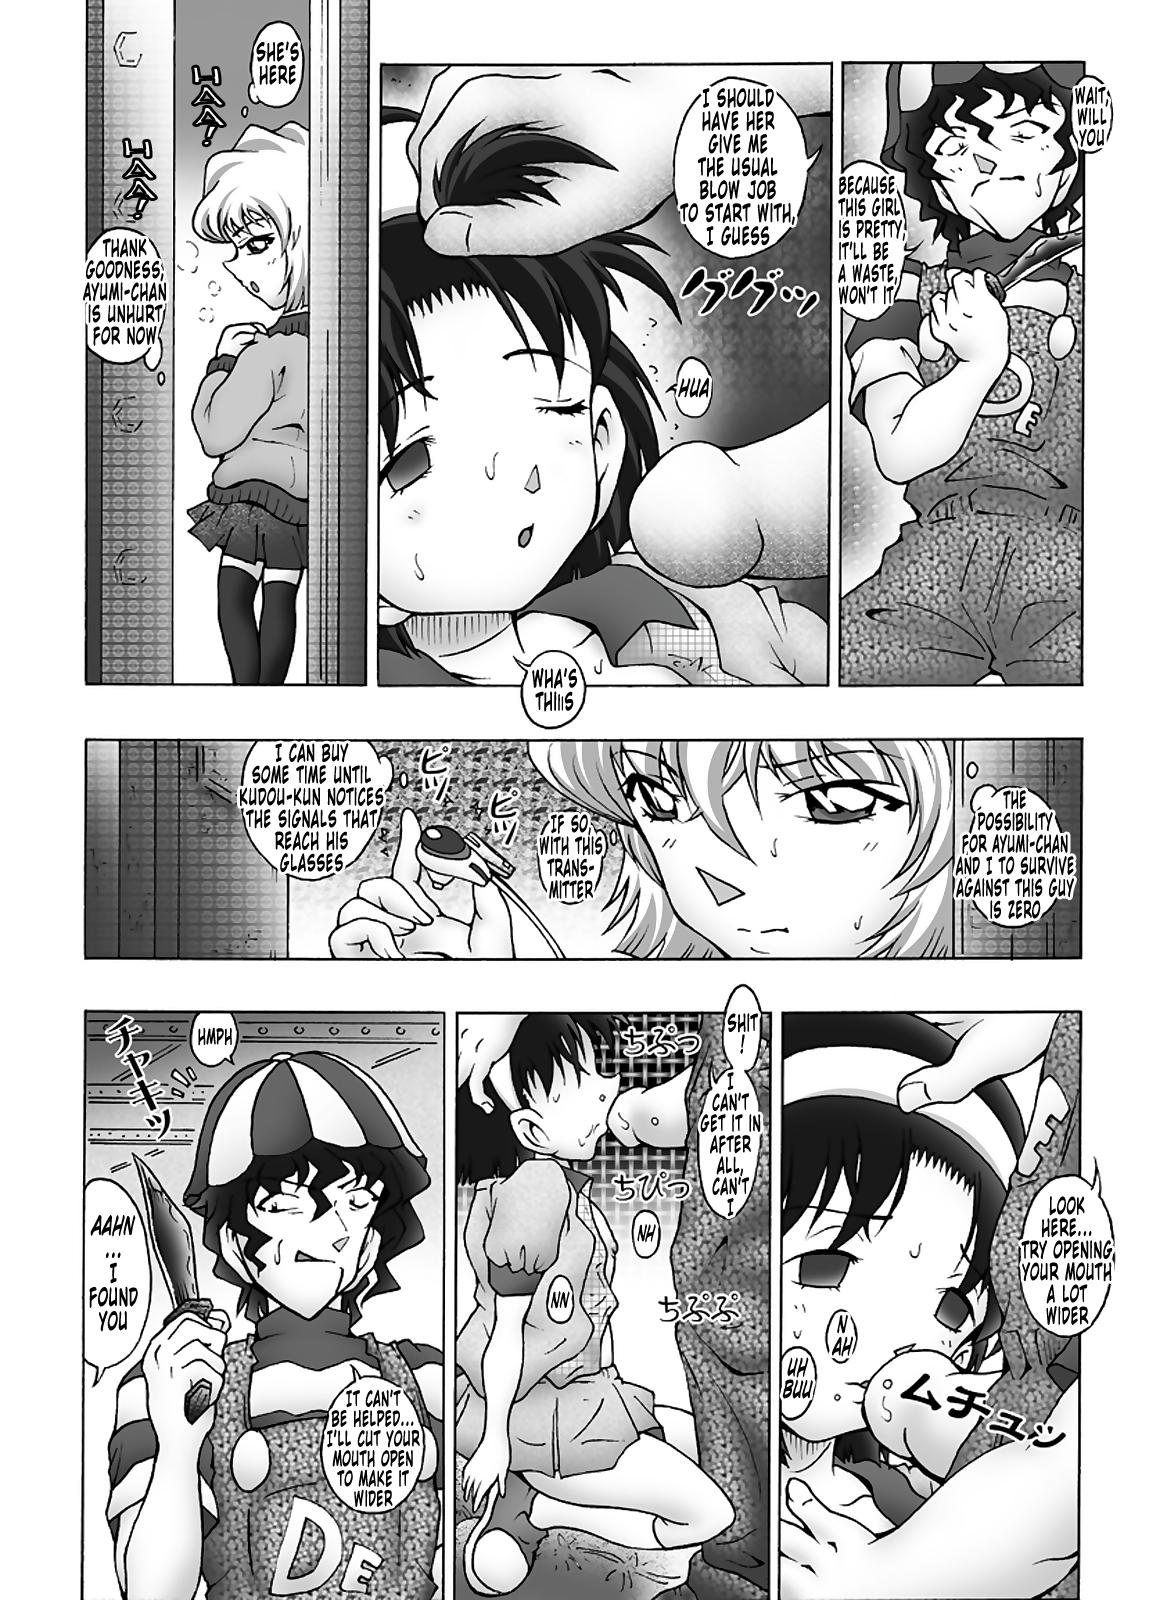 Baile Bumbling Detective Conan - File 11: The Mystery Of Jack The Ripper's True Identity - Detective conan Sexy Girl - Page 7